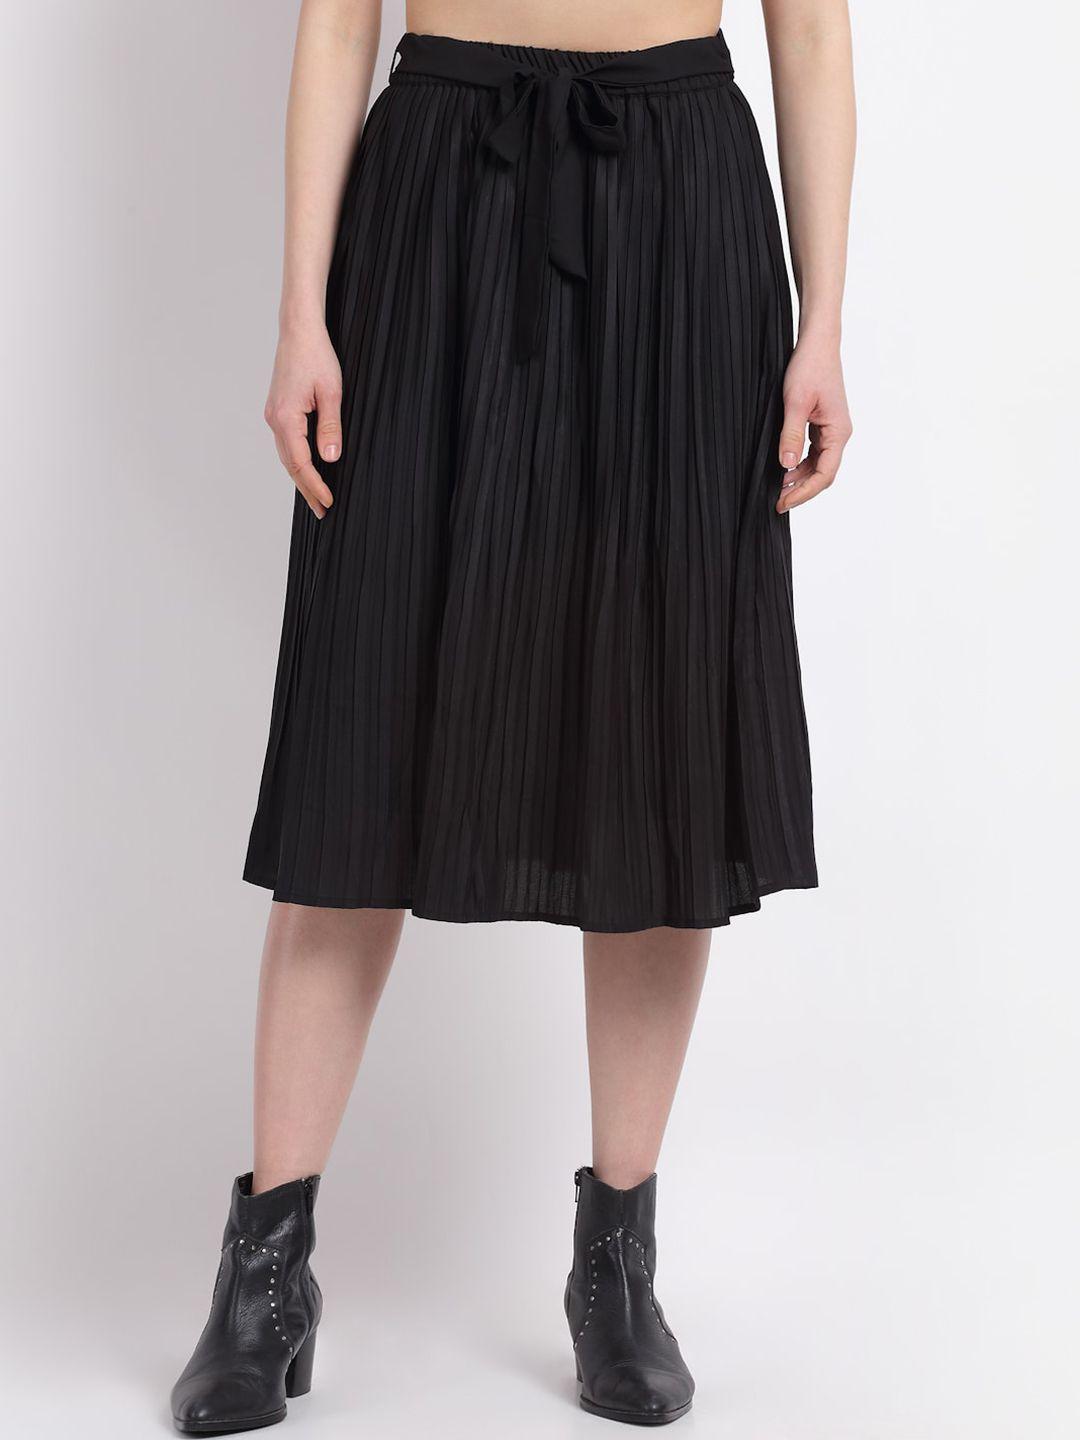 la-zoire-women-black-accordion-pleated-flared-skirt-with-attached-belt